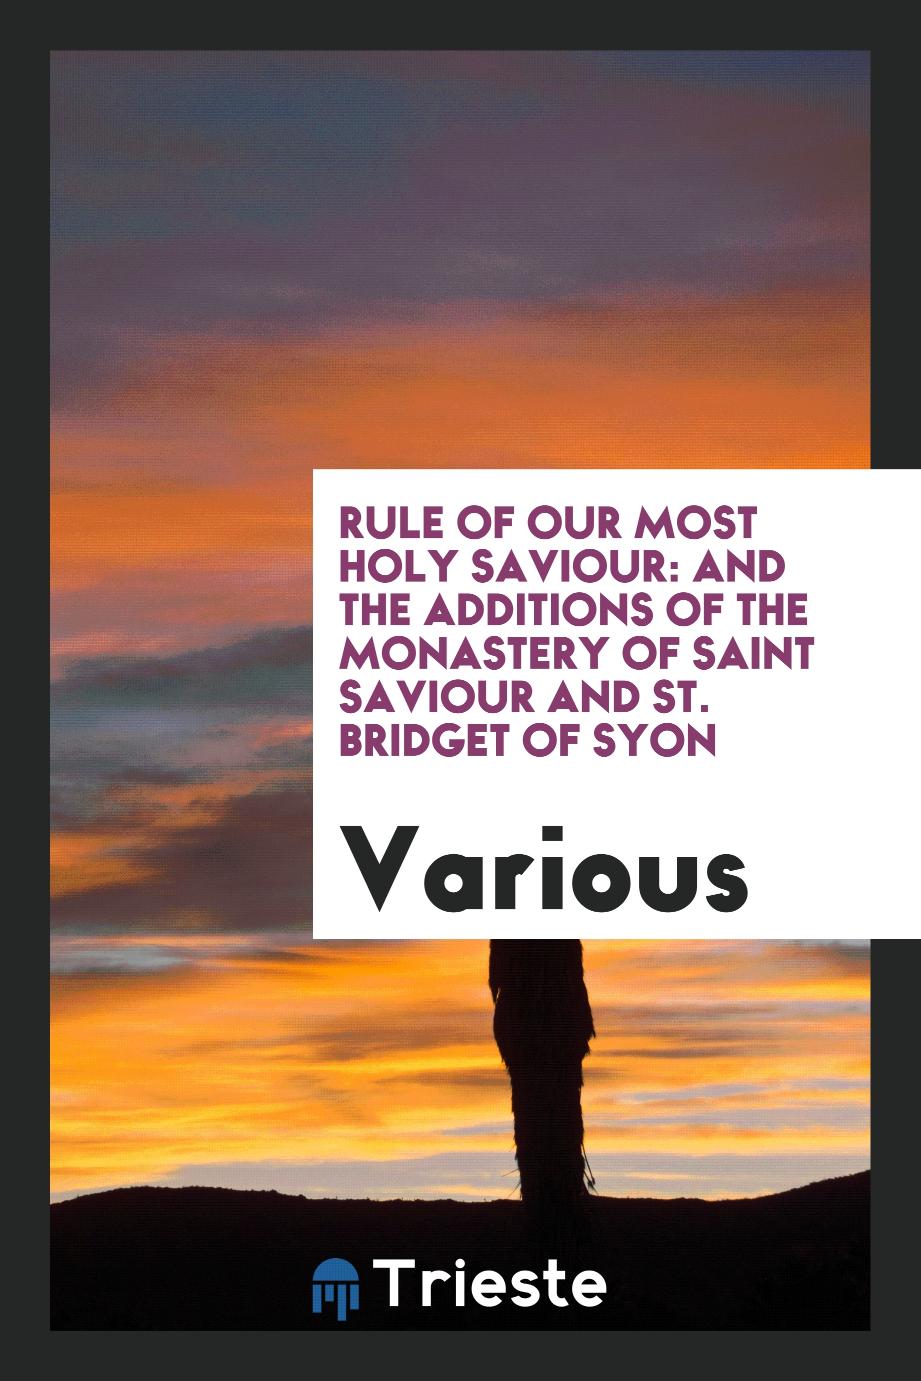 Rule of our most holy Saviour: and the additions of the Monastery of Saint Saviour and St. Bridget of Syon